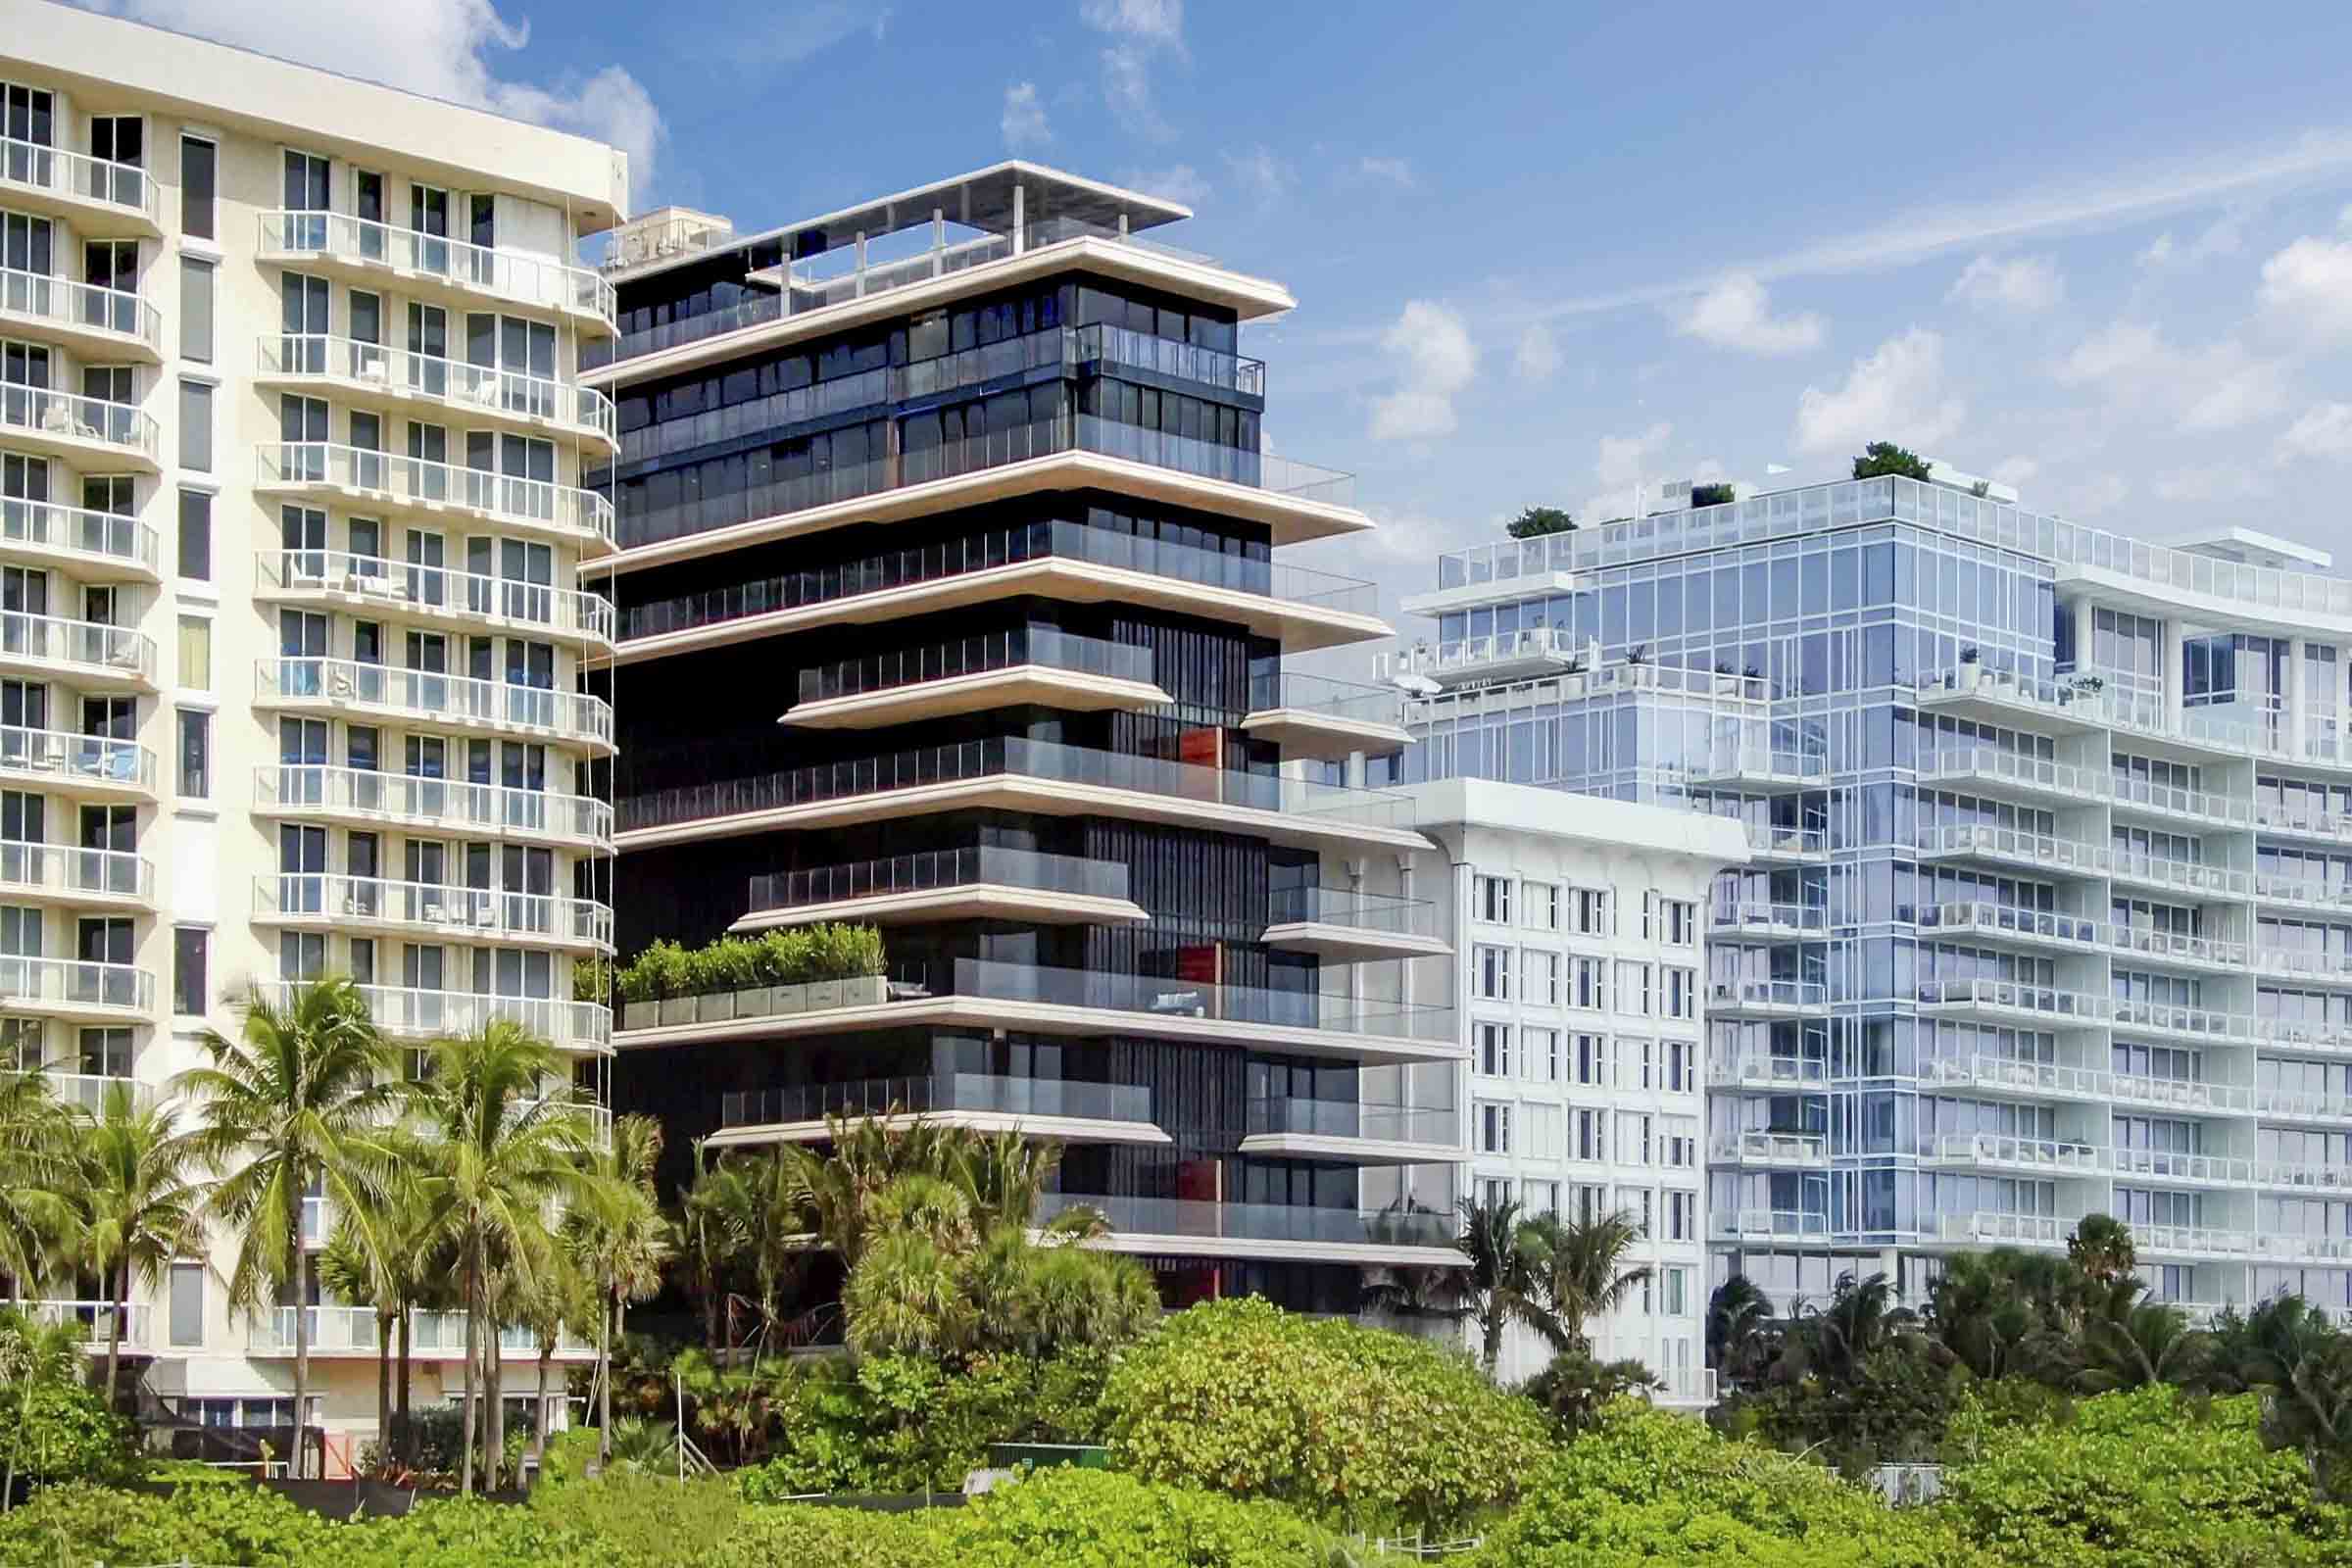 Arte in Surfside Residences: Surf’s Up After Record-Breaking January! Only 1 Condo Remains